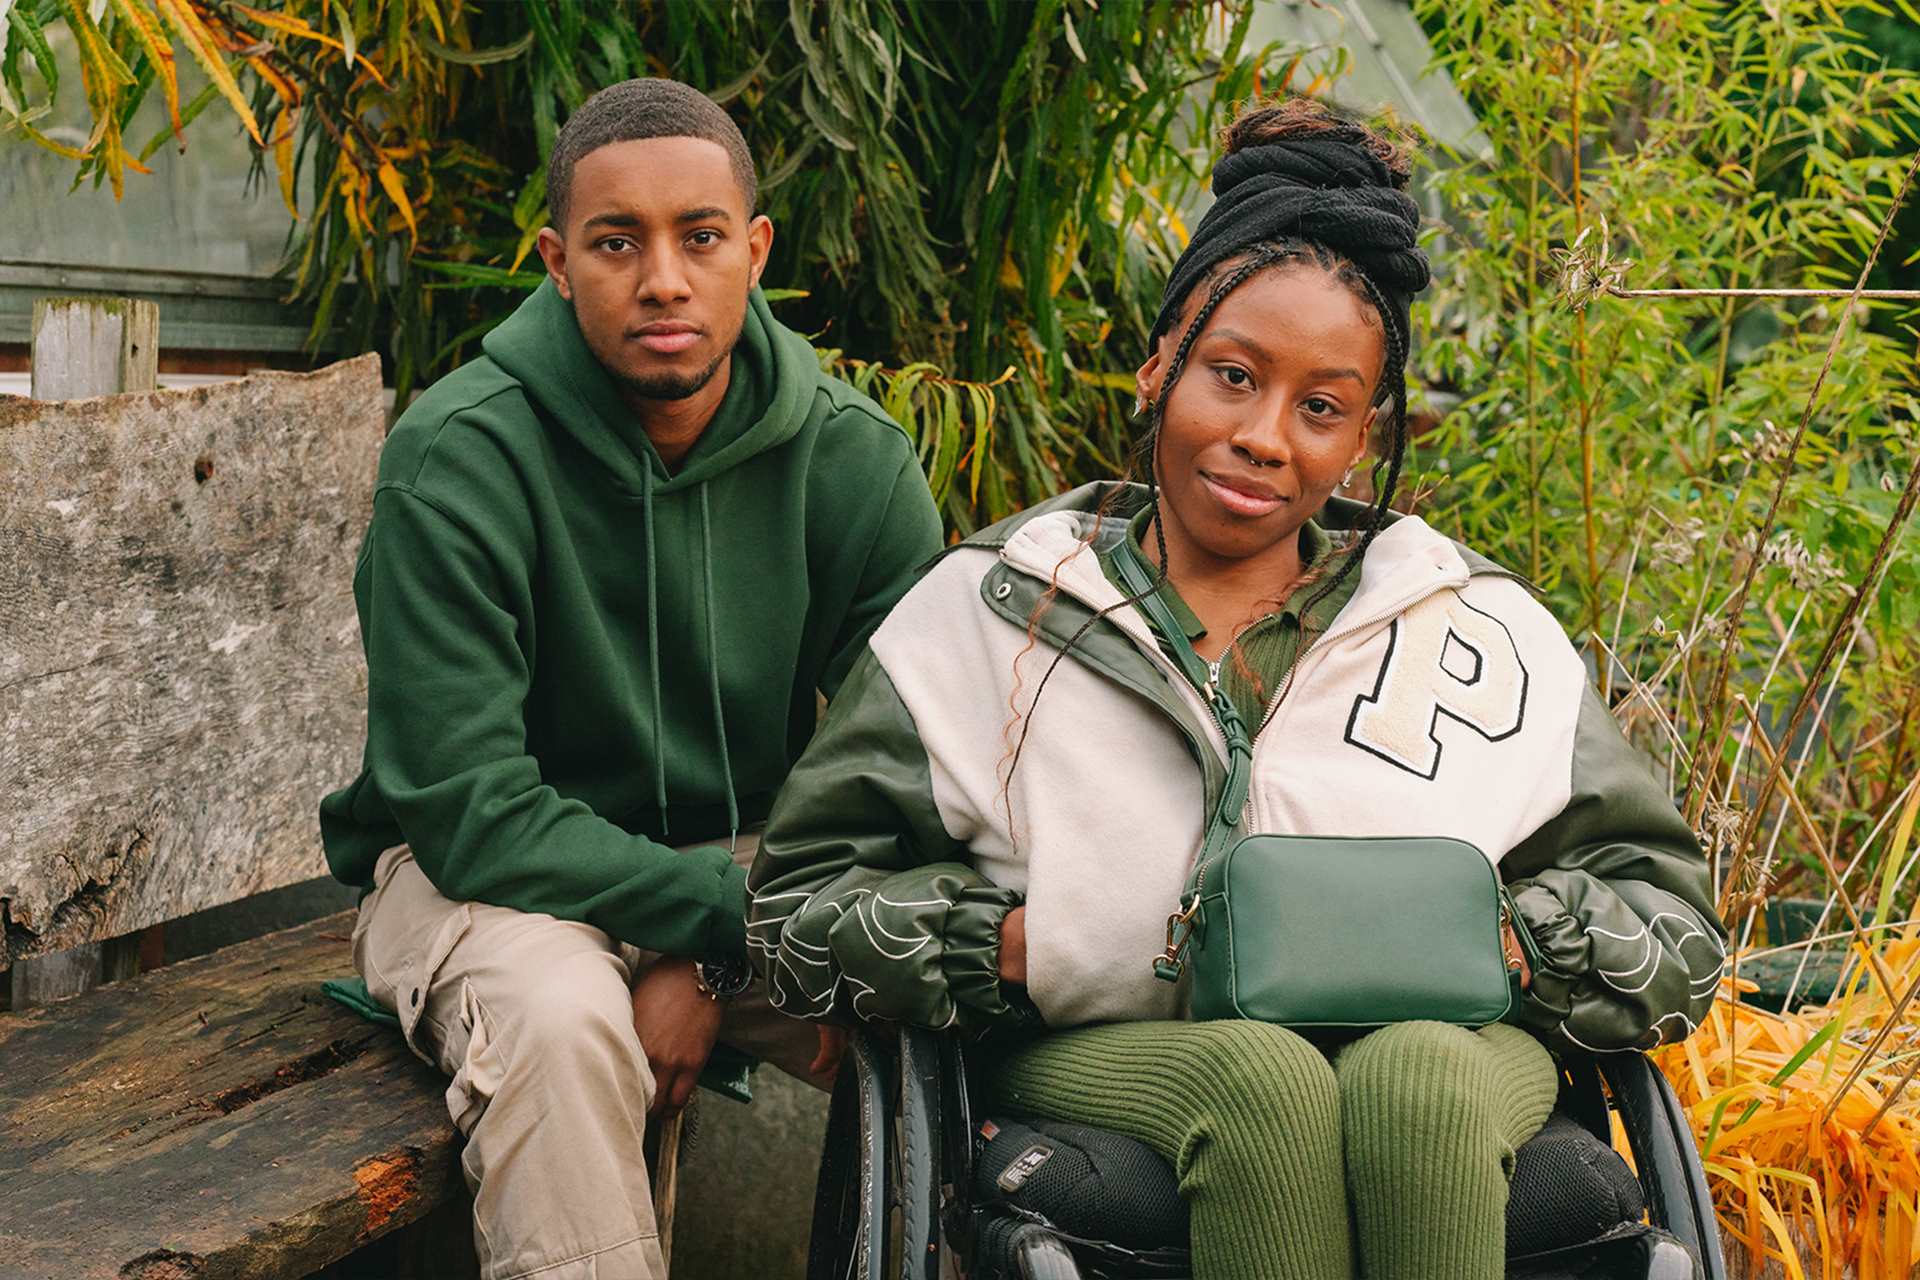 A young Black woman in a wheelchair and a young Black man on a bench, both staring at the camera looking serious.